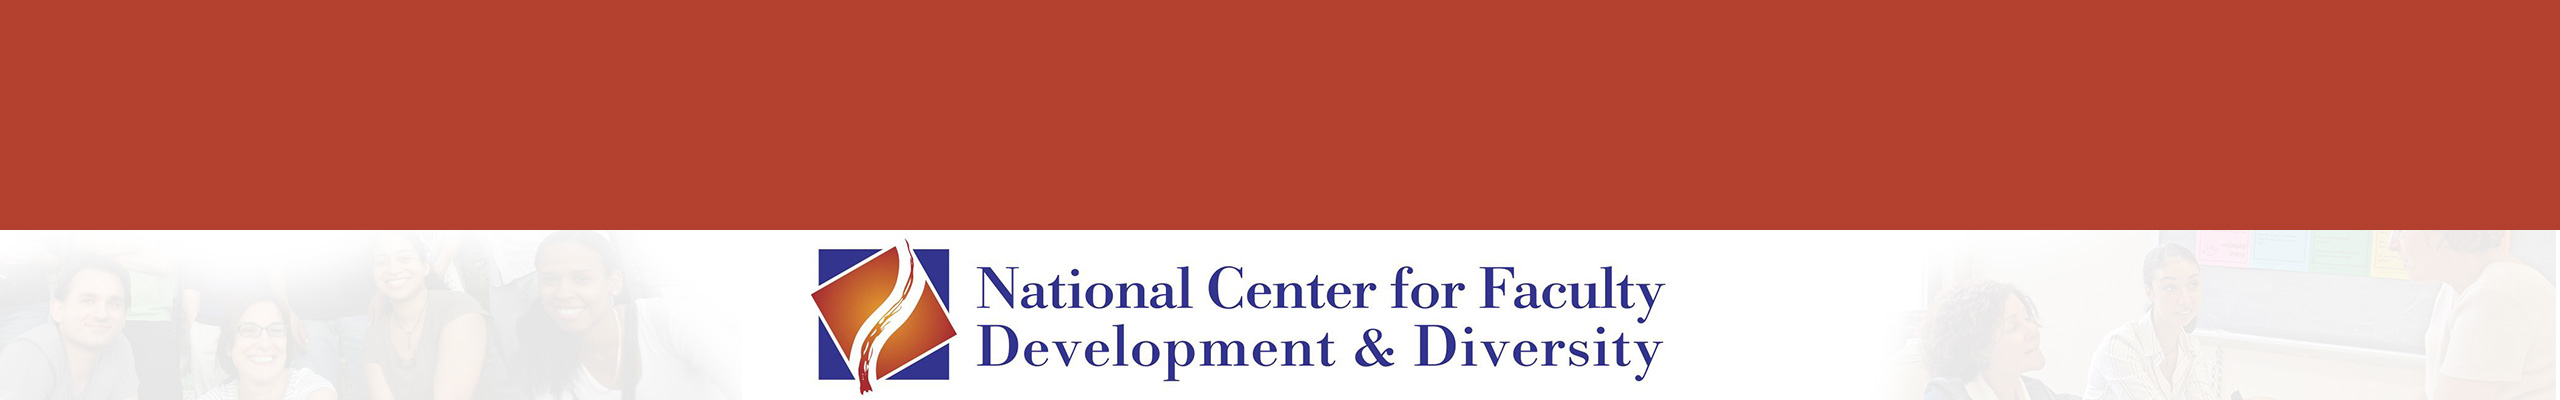 National Center for Faculty Development and Diversity (NCFDD)